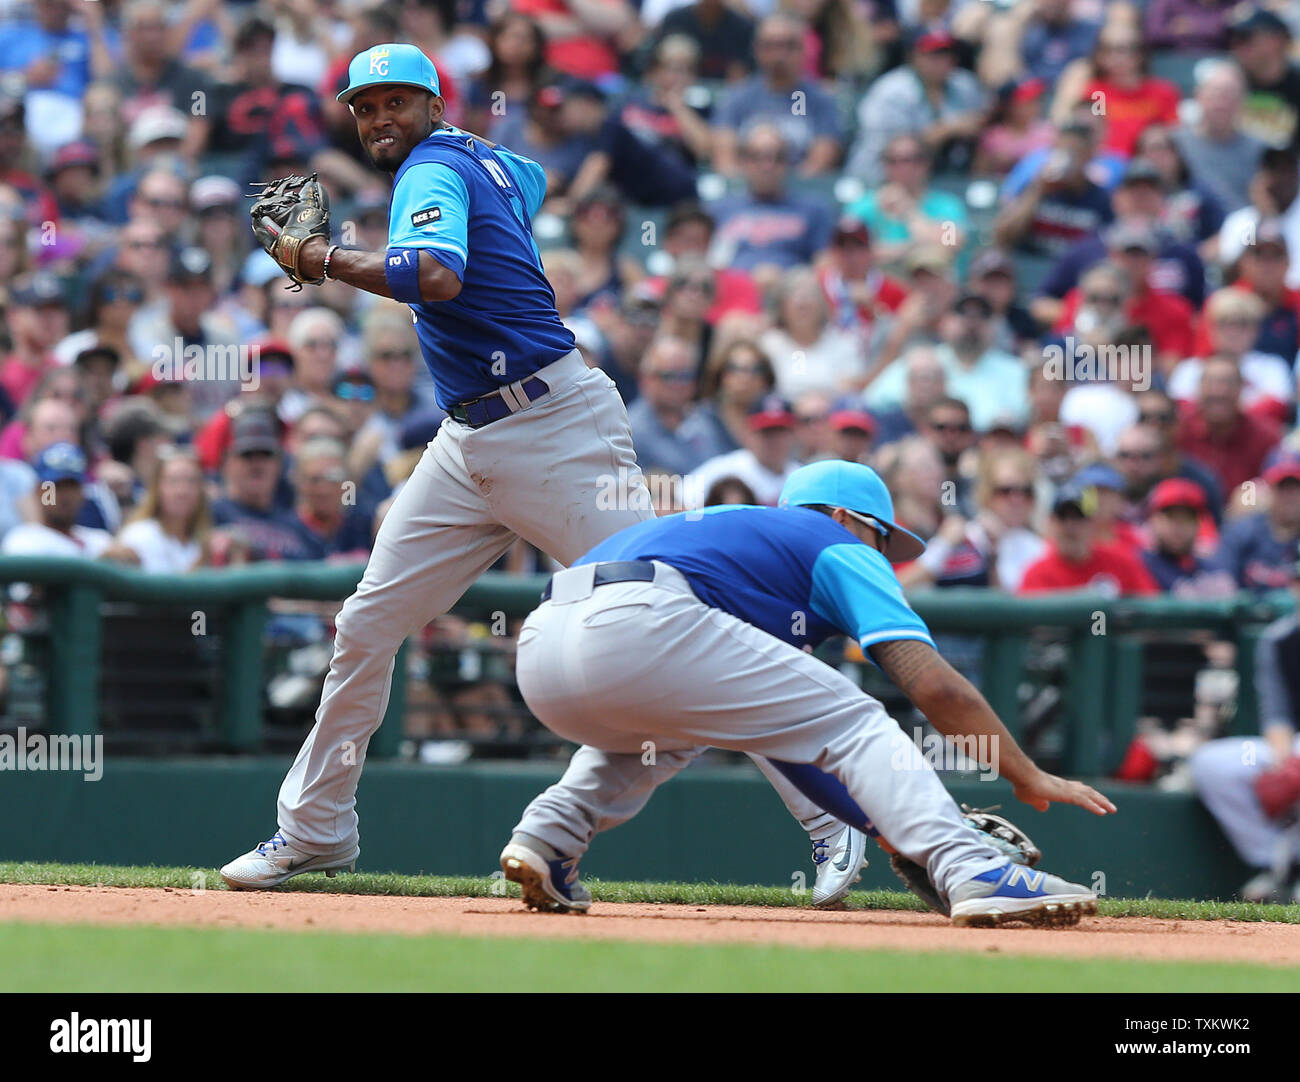 Alcides escobar hi-res stock photography and images - Alamy